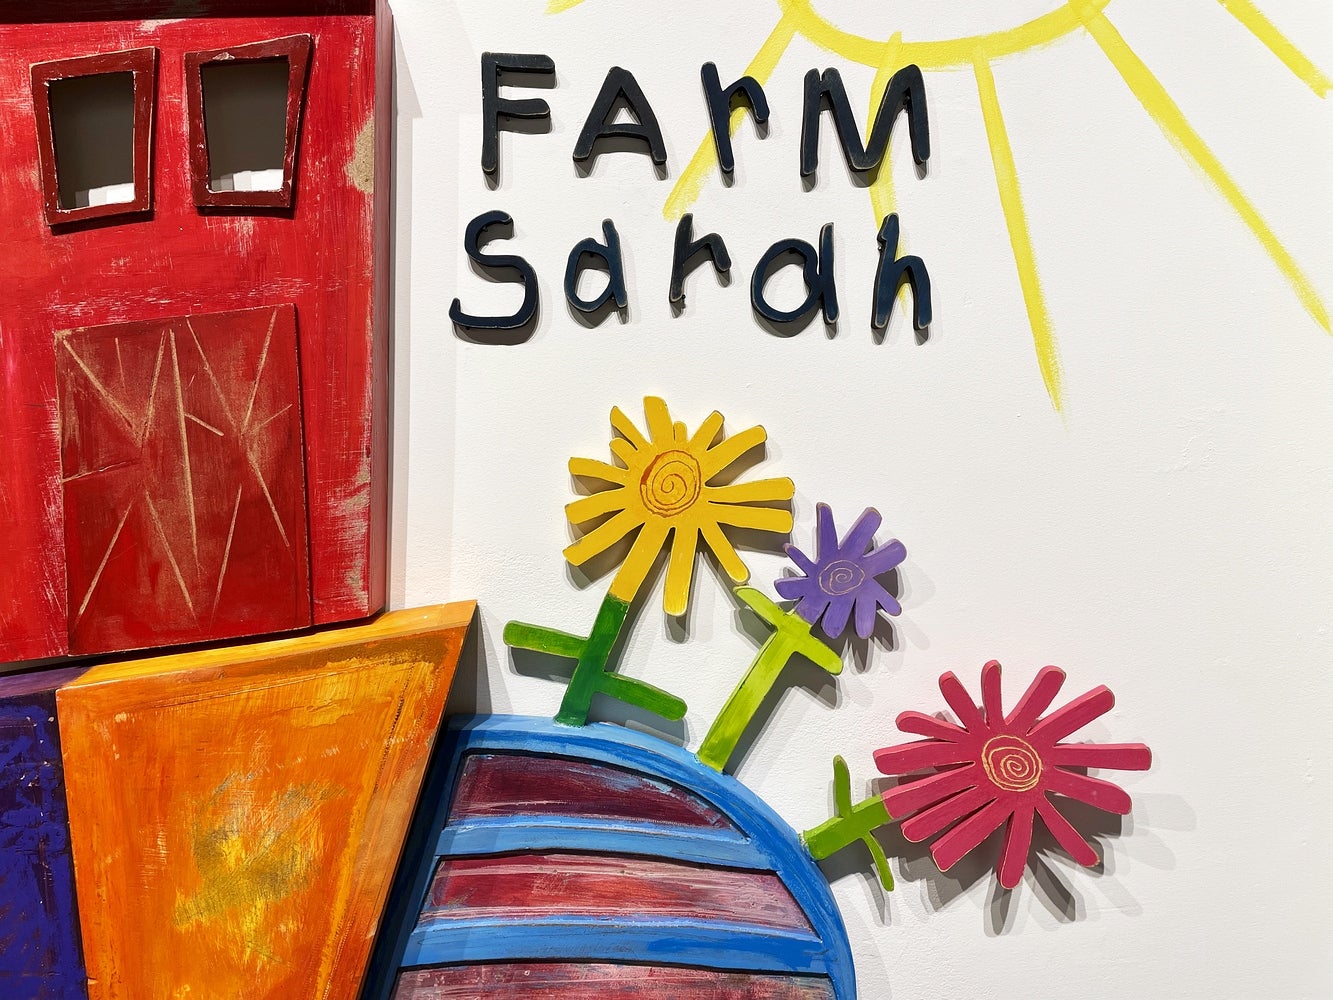 Detail of artwork consisting of painted wooden shapes arranged to form a childlike red barn and flowers, text "Farm Sarah"